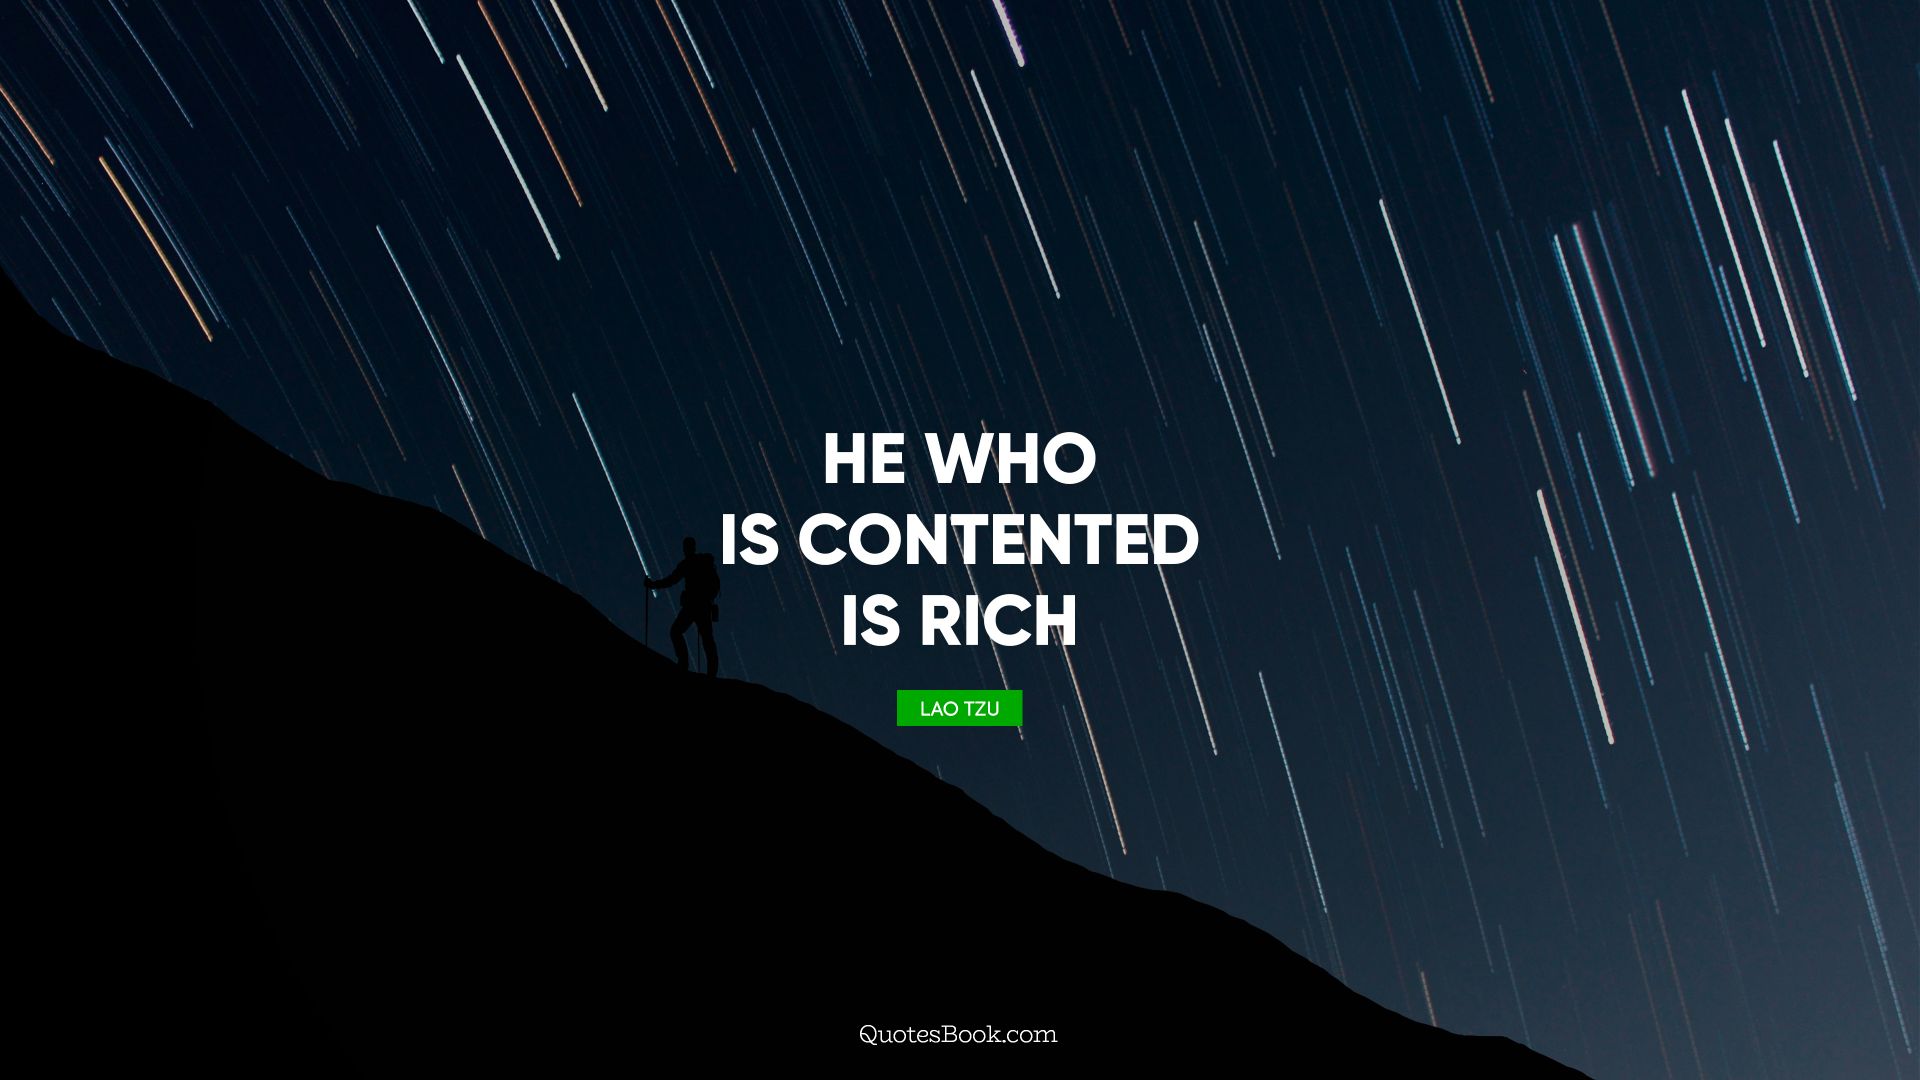 He who is contented is rich. - Quote by Lao Tzu